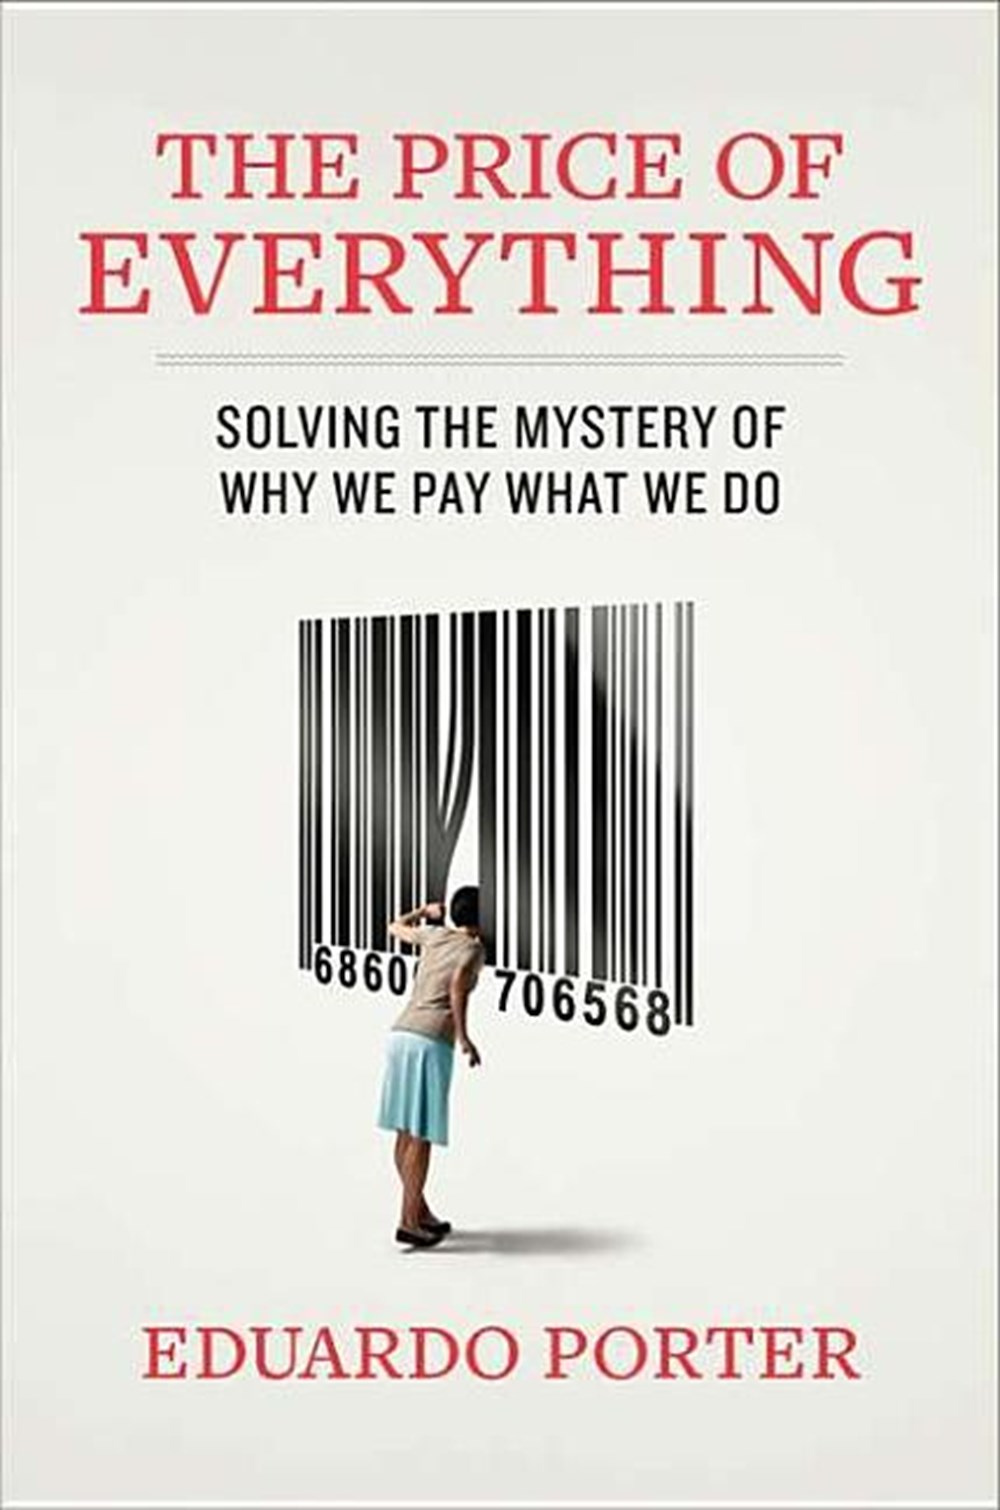 Price of Everything: Solving the Mystery of Why We Pay What We Do